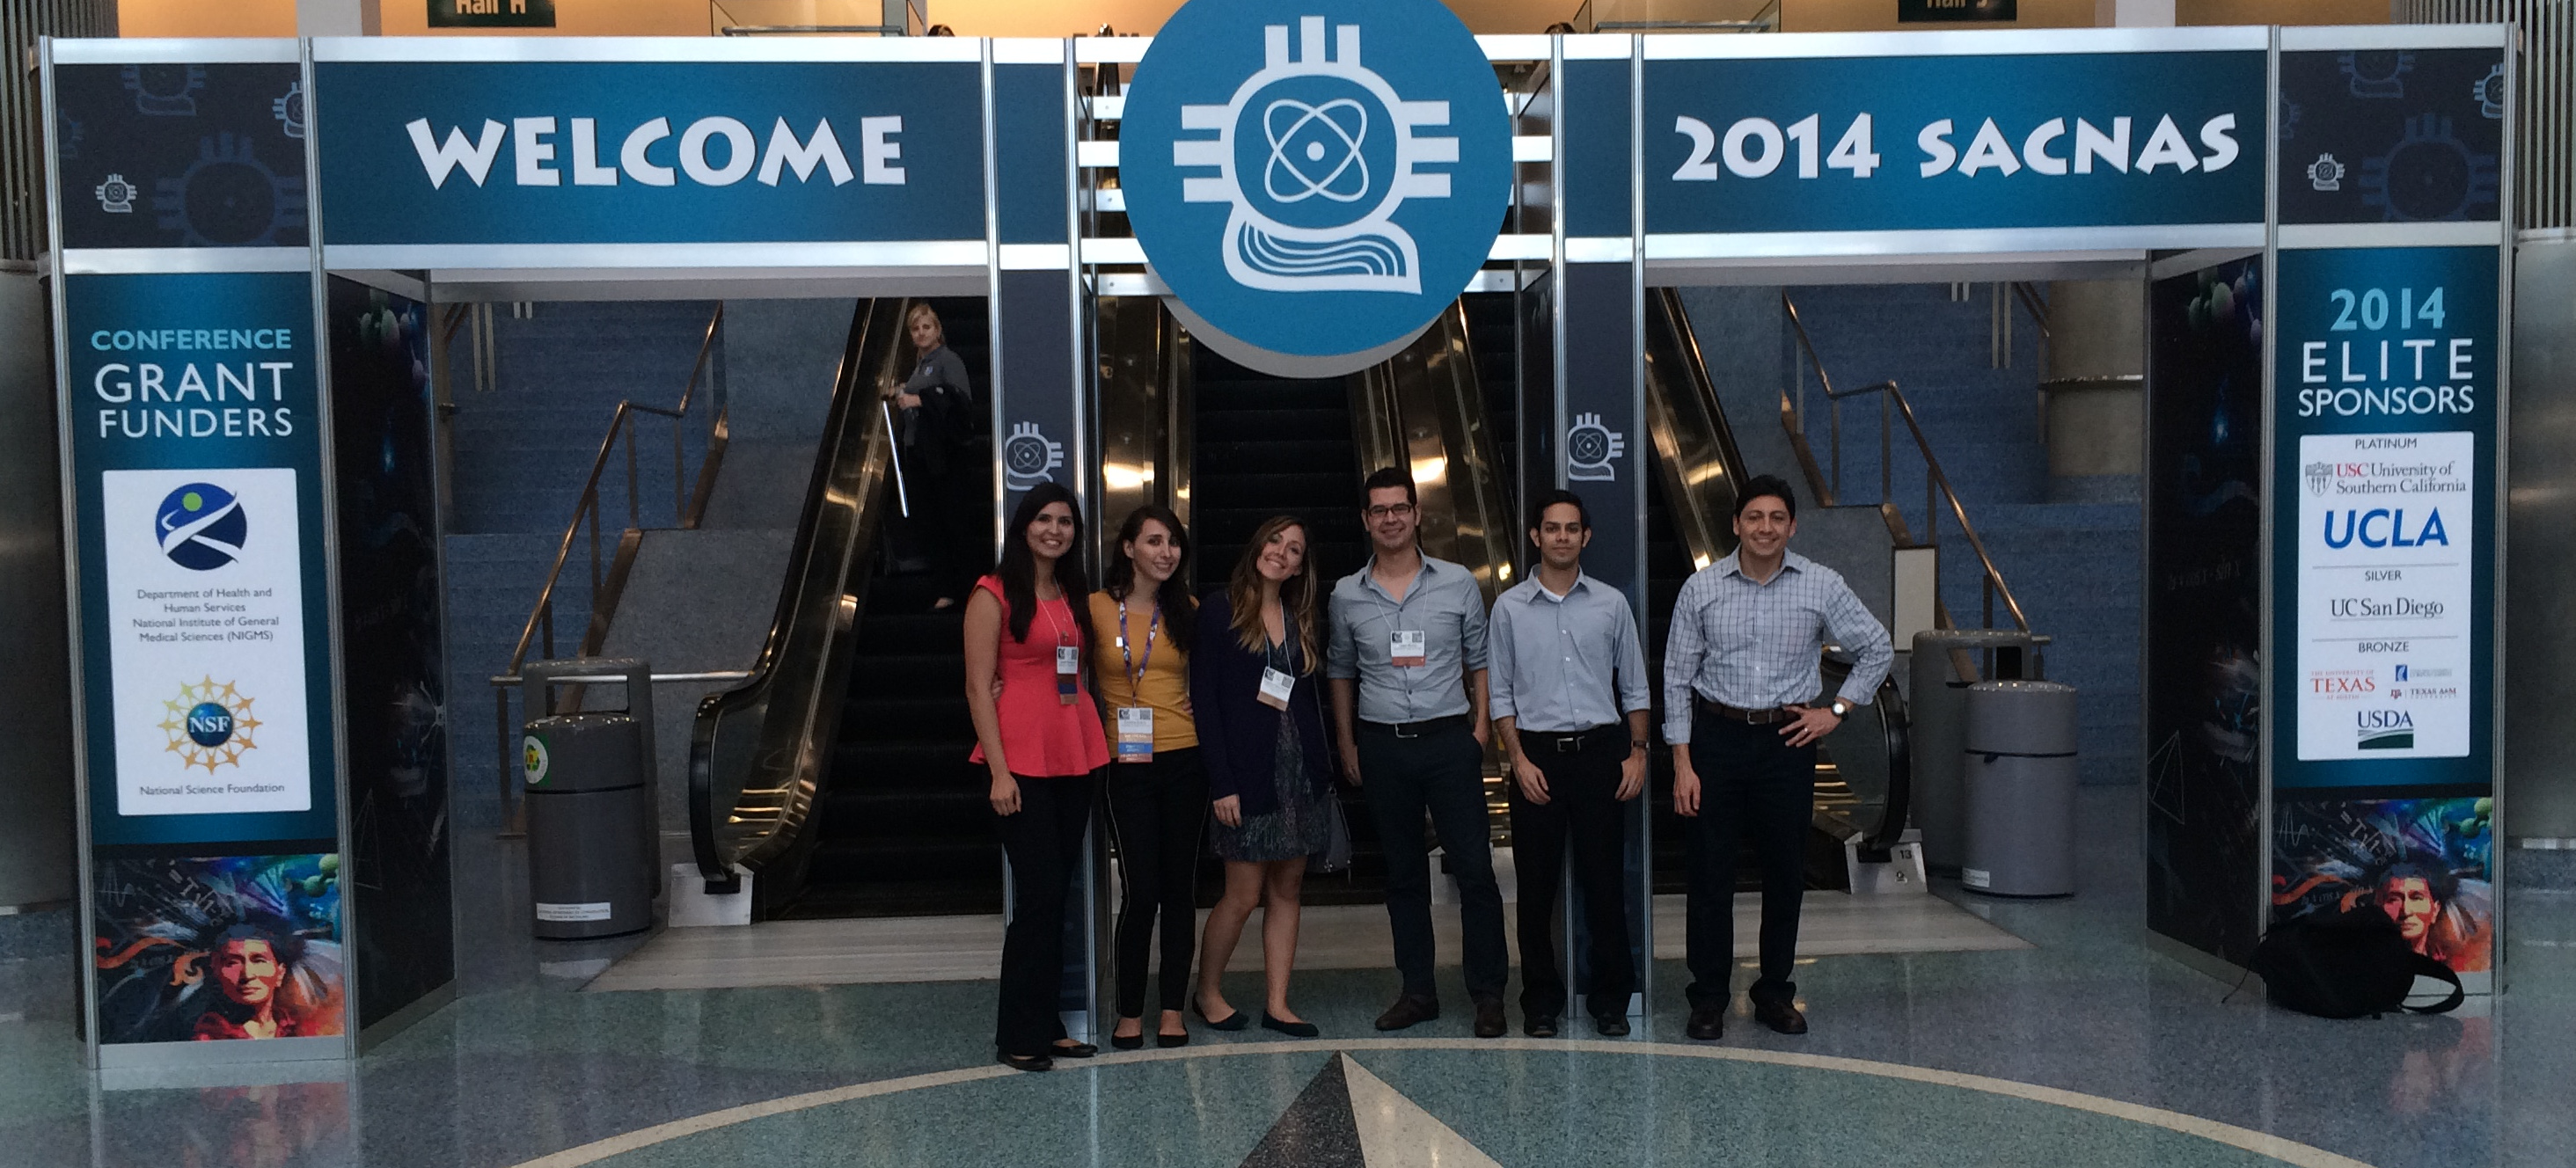 Clemente Aguilar, NIMBioS postdoctoral fellow (right) with conference participants at SACNAS, including Carolina Guerra (gold shirt) who was a NIMBioS visiting graduate fellow from June-August 2014.